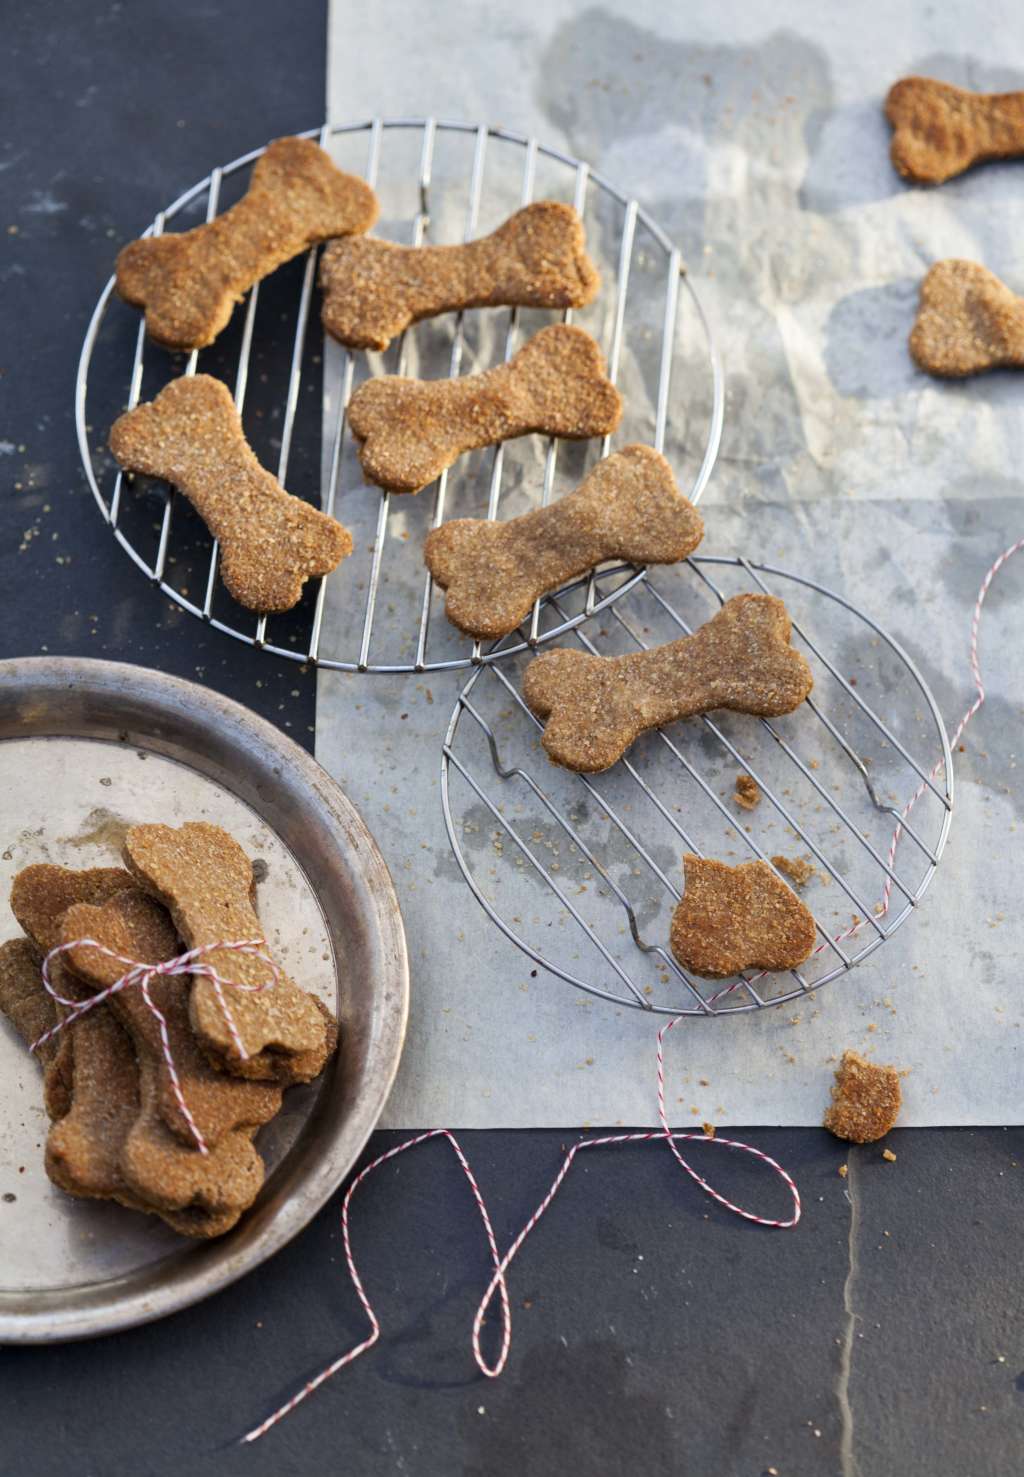 Cookies For Canines: 9 Homemade Dog Treat Recipes | Kitchn